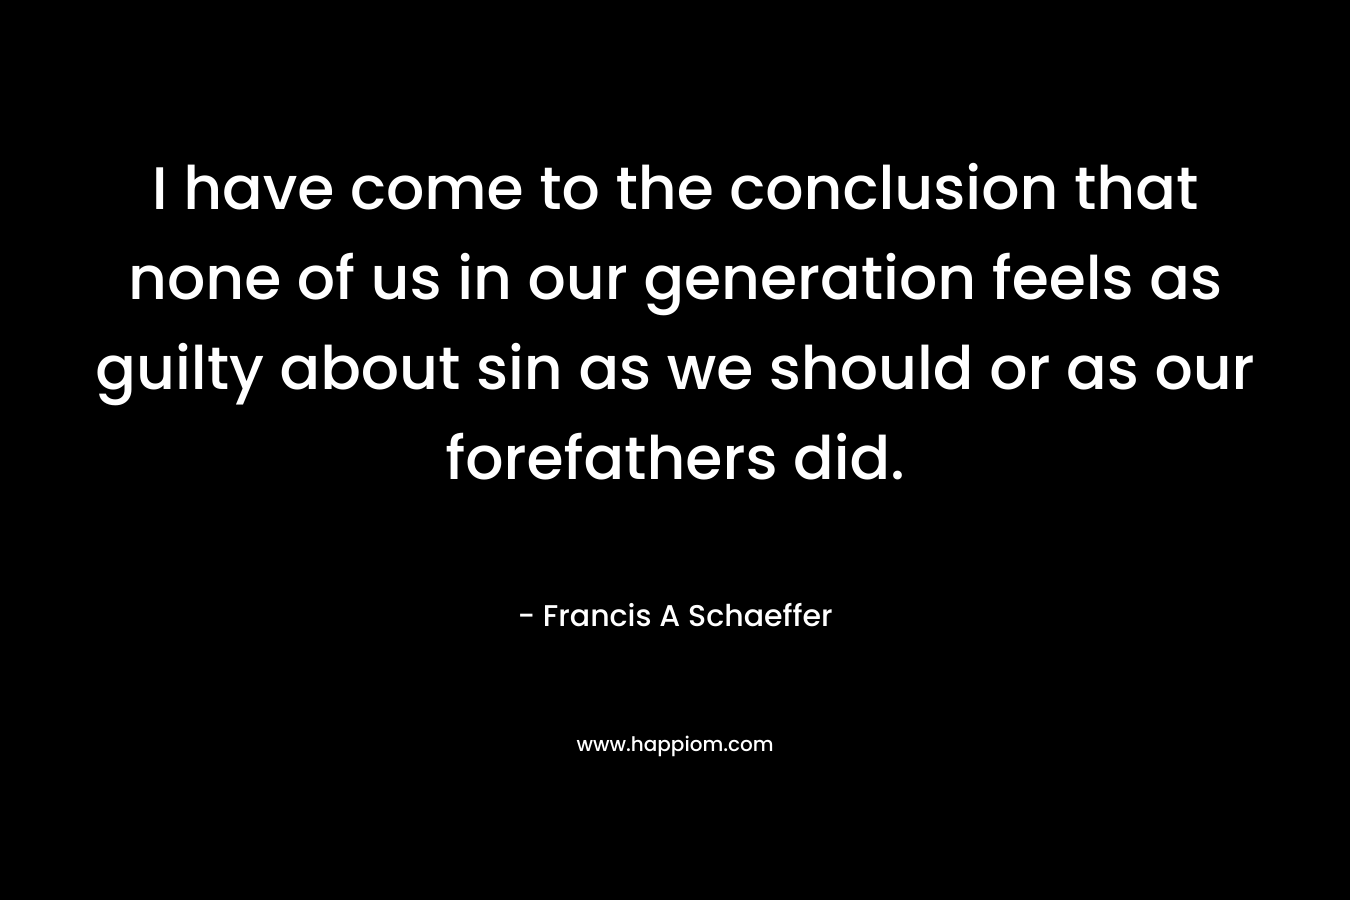 I have come to the conclusion that none of us in our generation feels as guilty about sin as we should or as our forefathers did. – Francis A Schaeffer